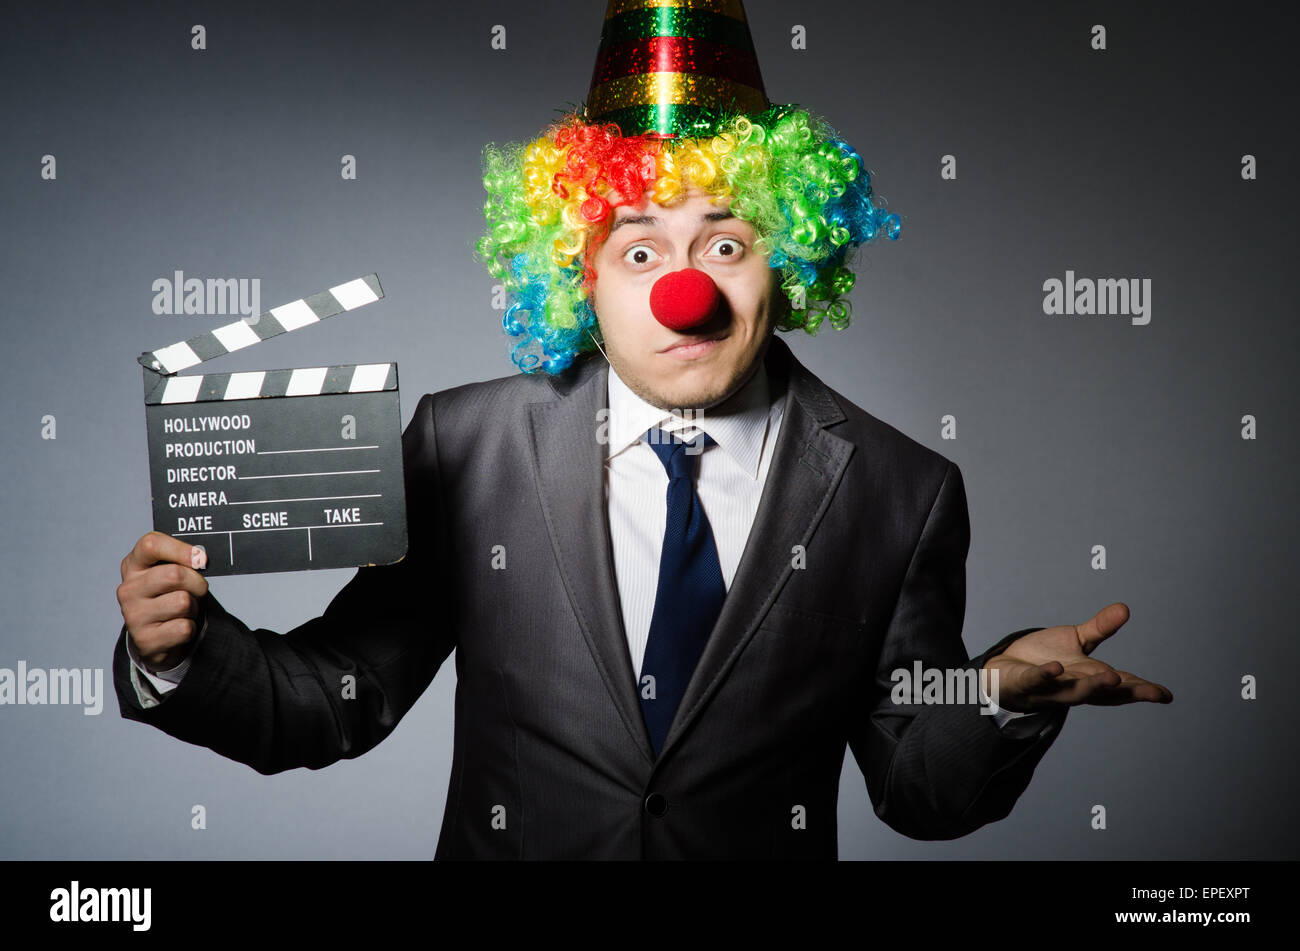 Clown with the movie board Stock Photo